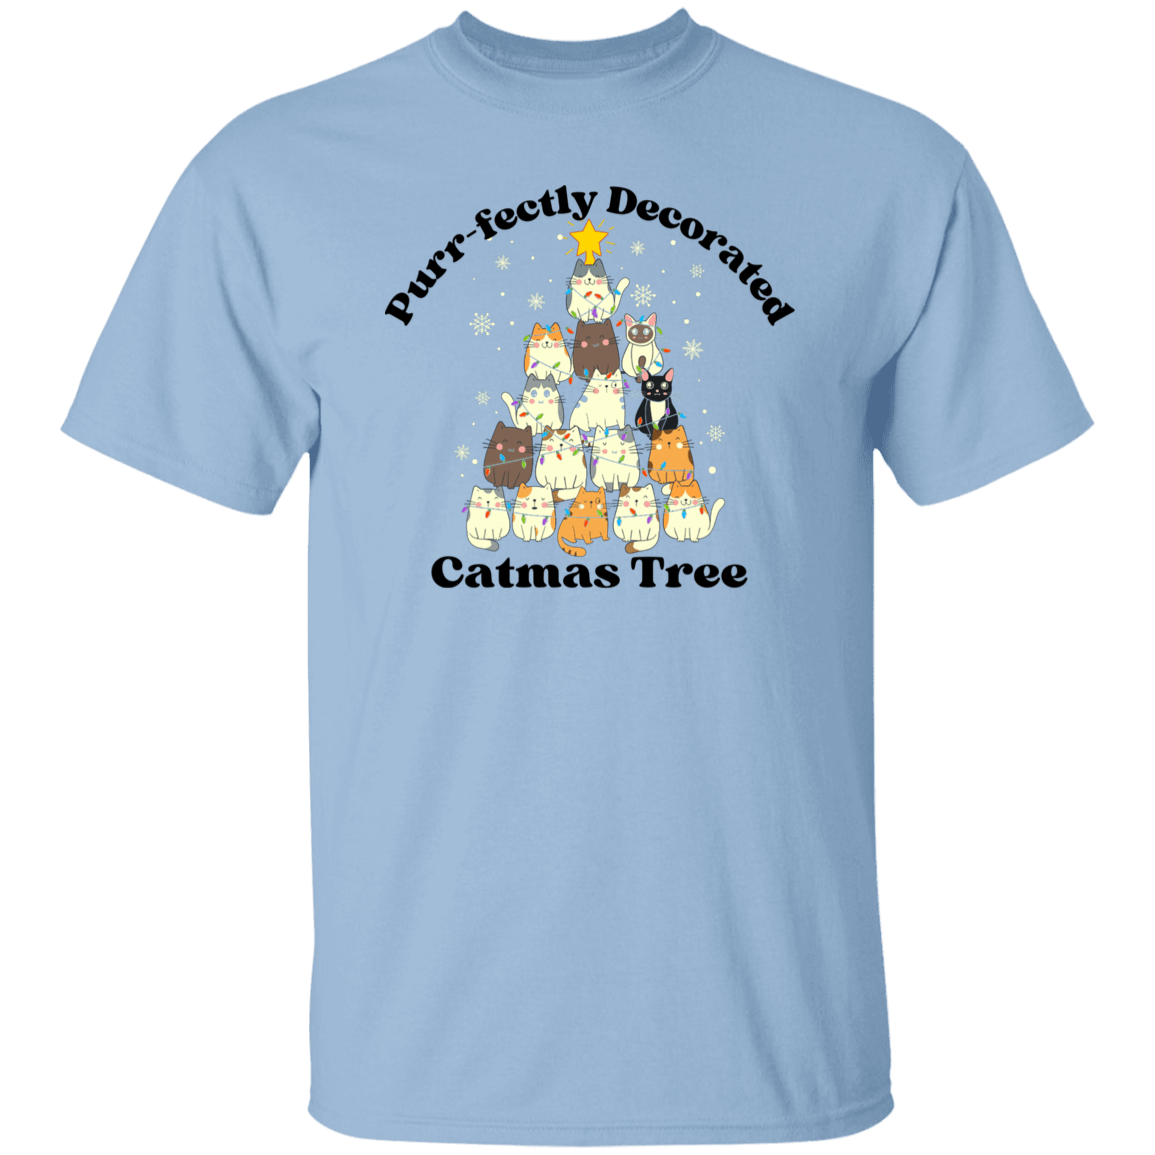 Purr-fectly Decorated Christmas TreeT-Shirt